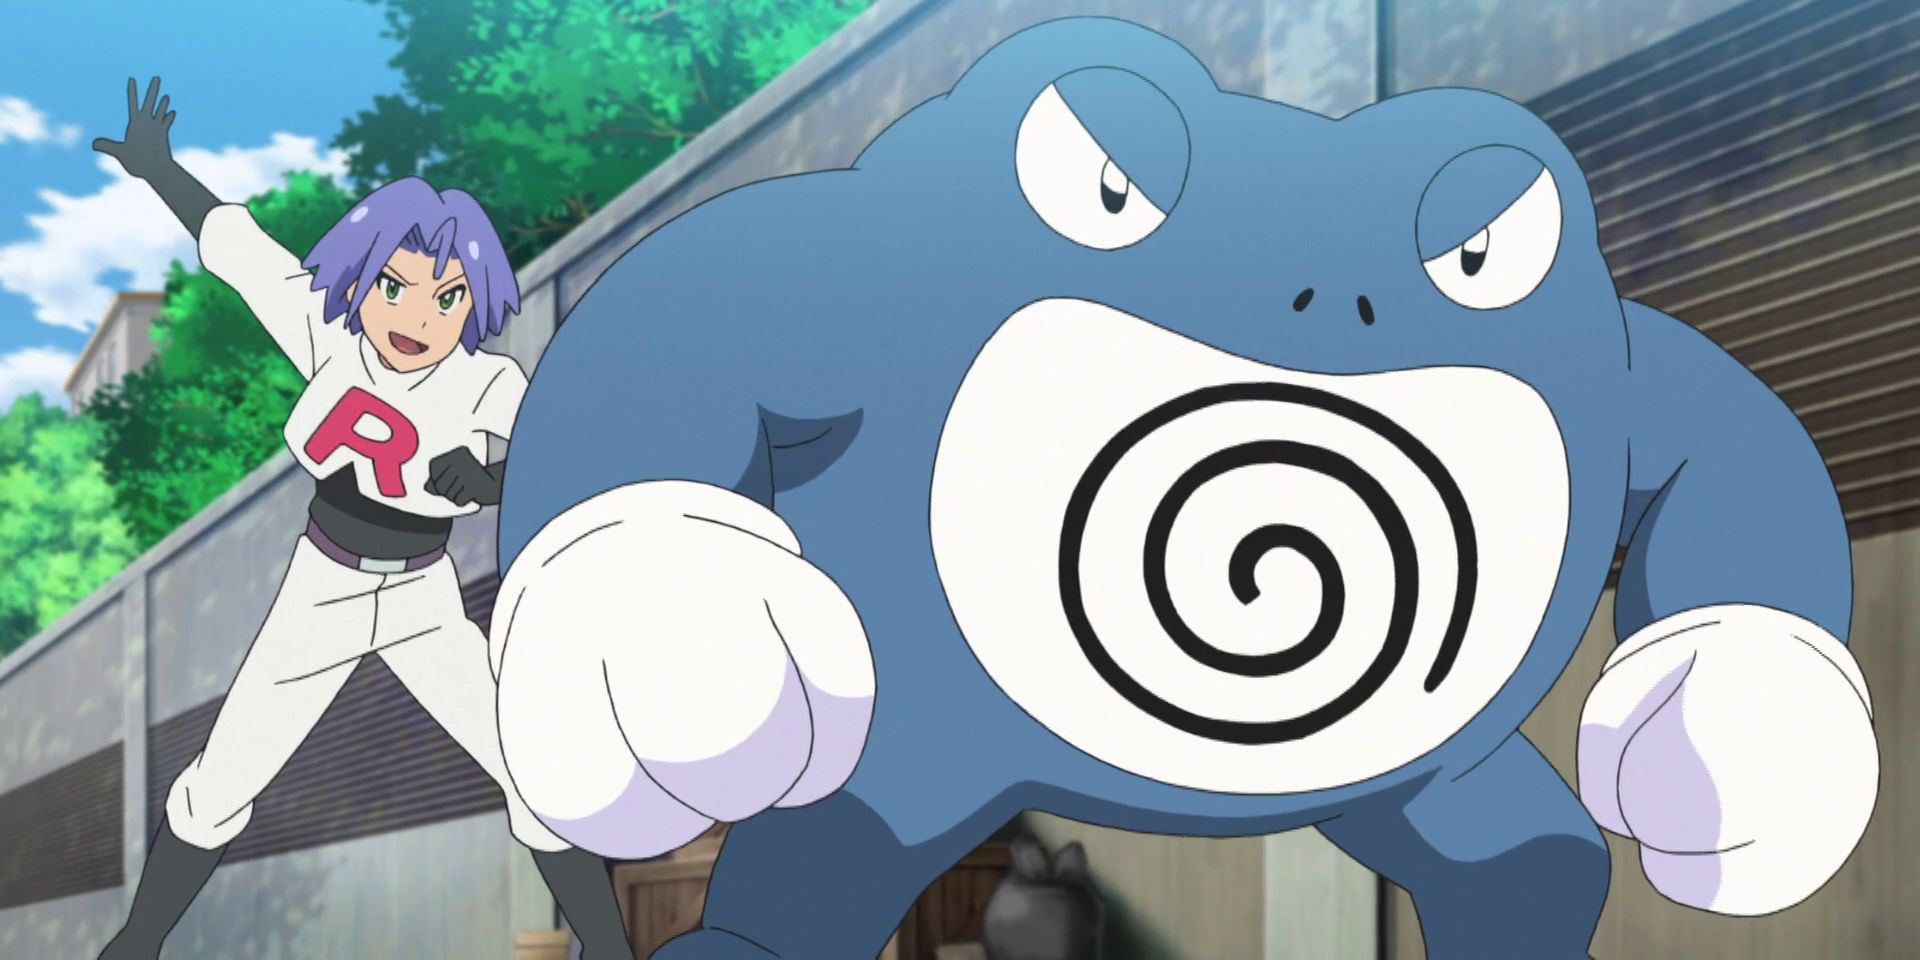 James commands a Poliwrath to attack in the Pokemon anime